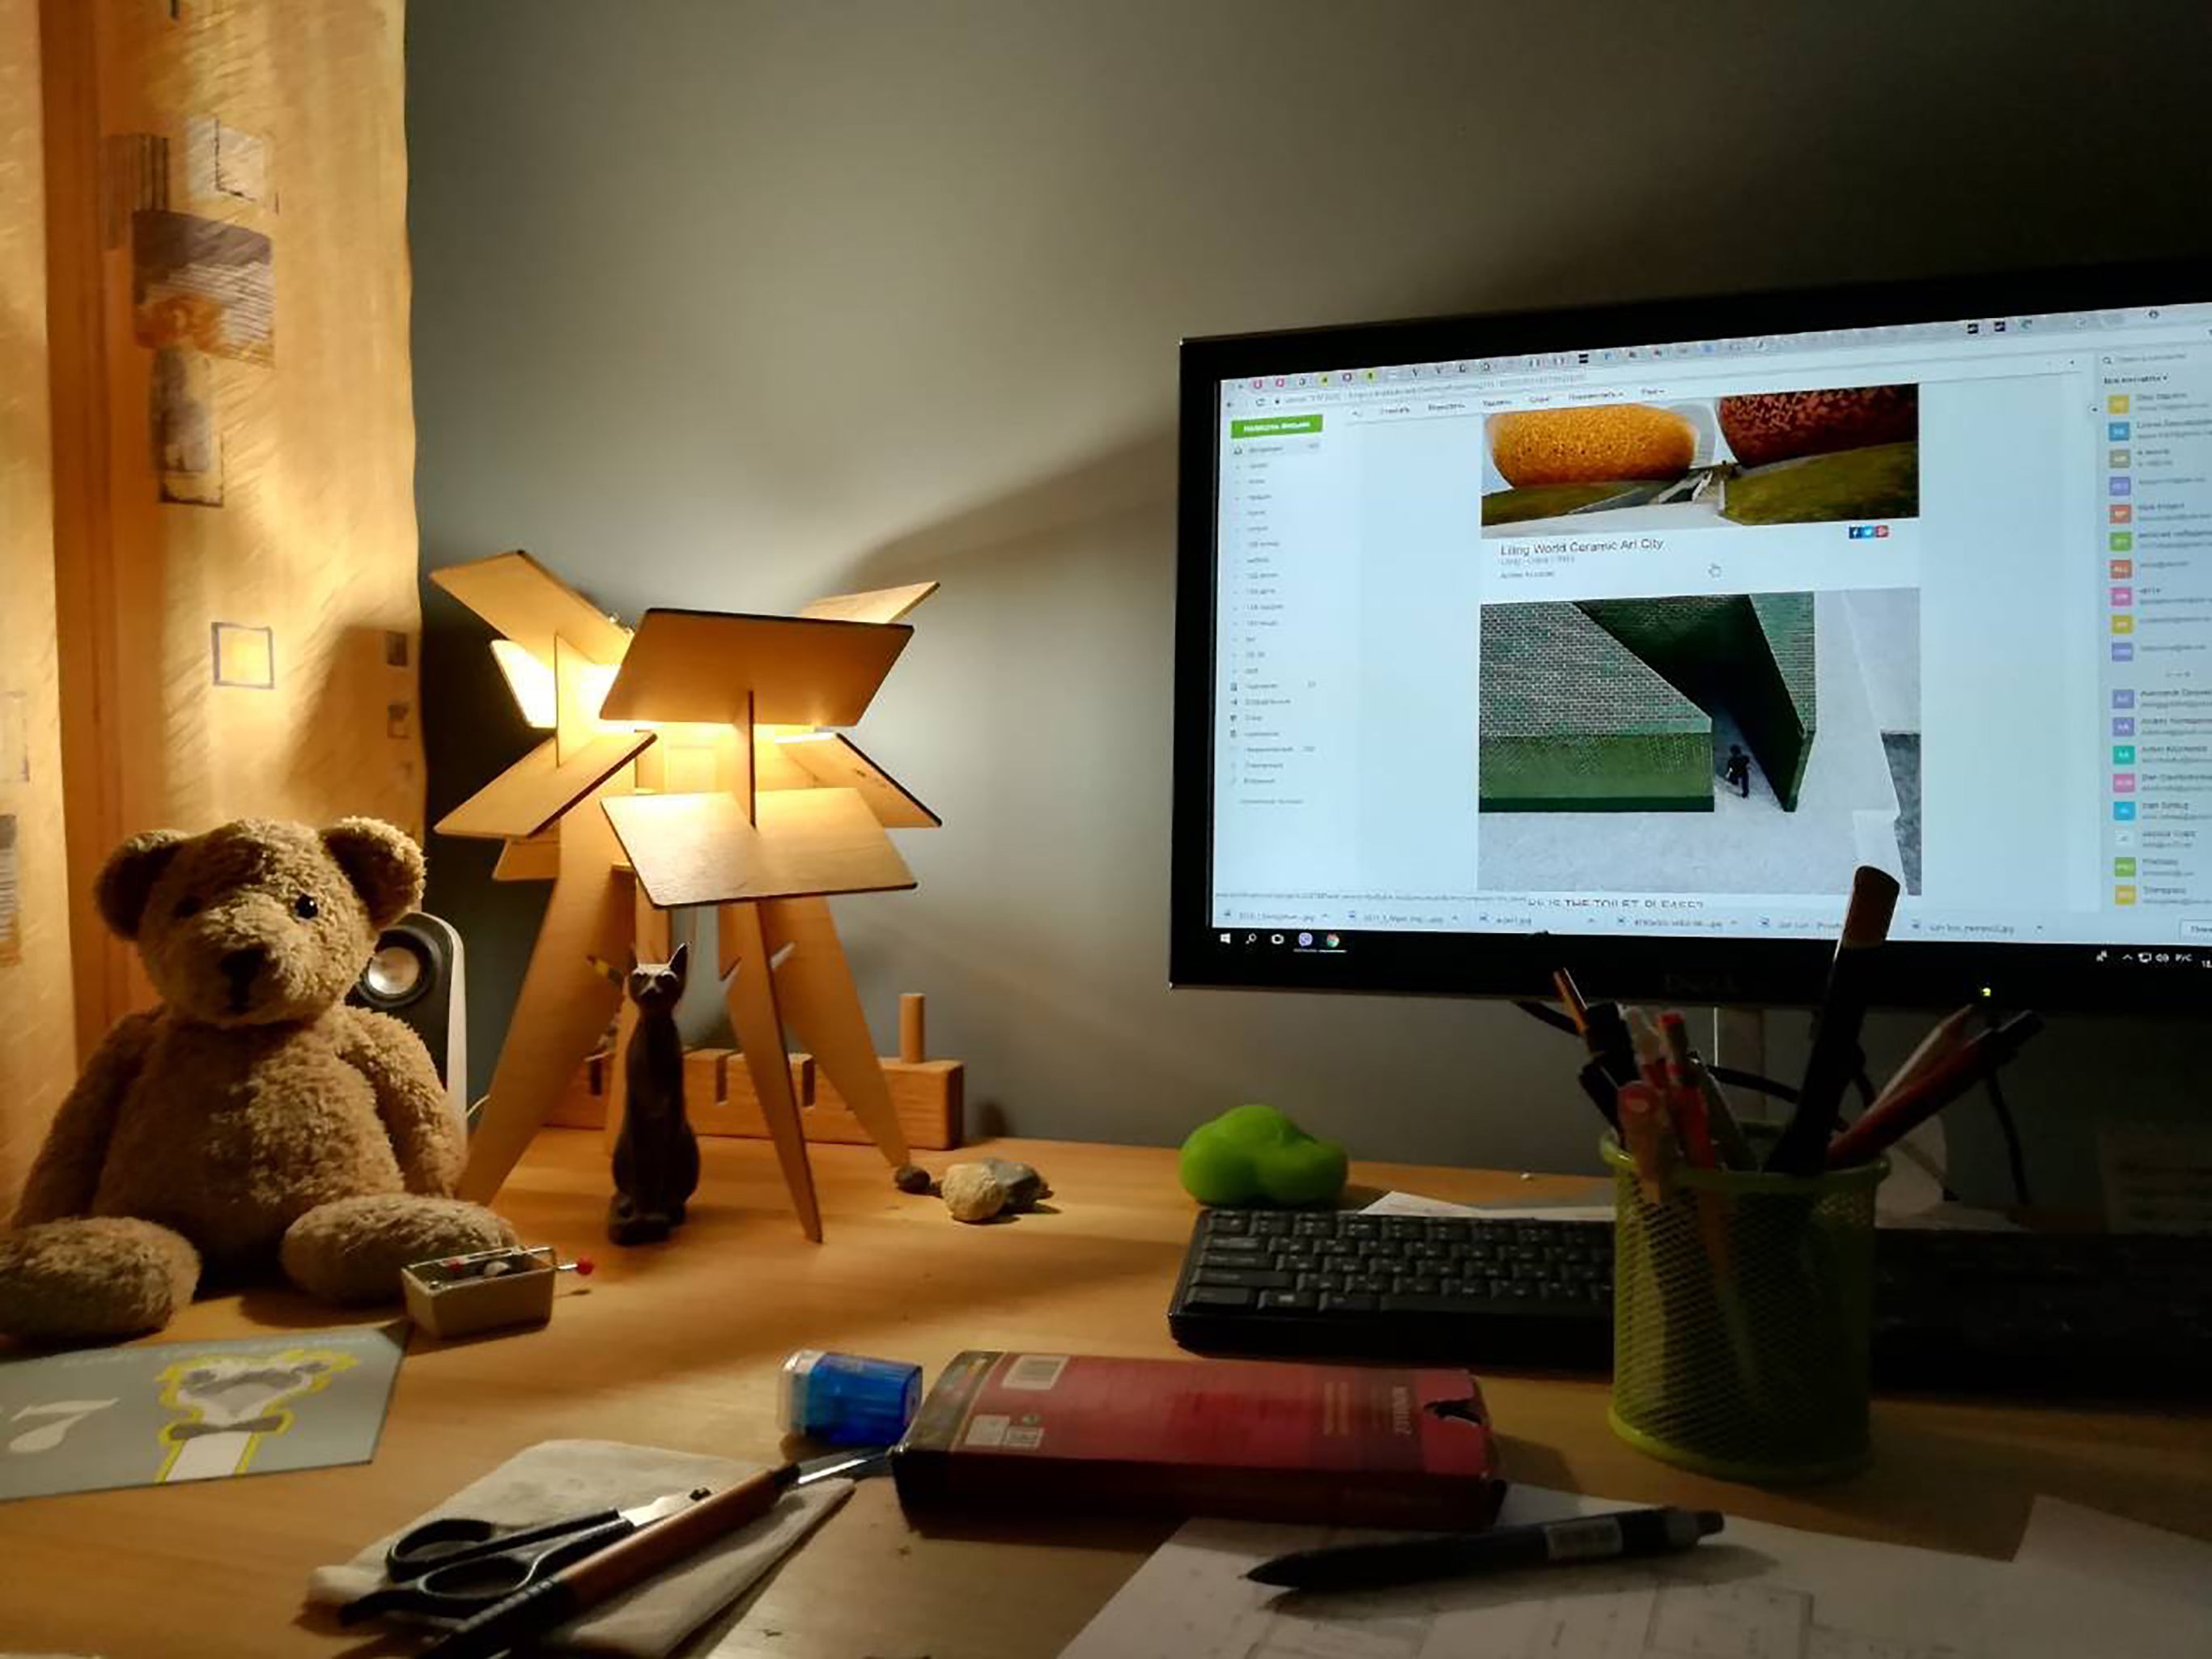 Desk lamp on the work table.